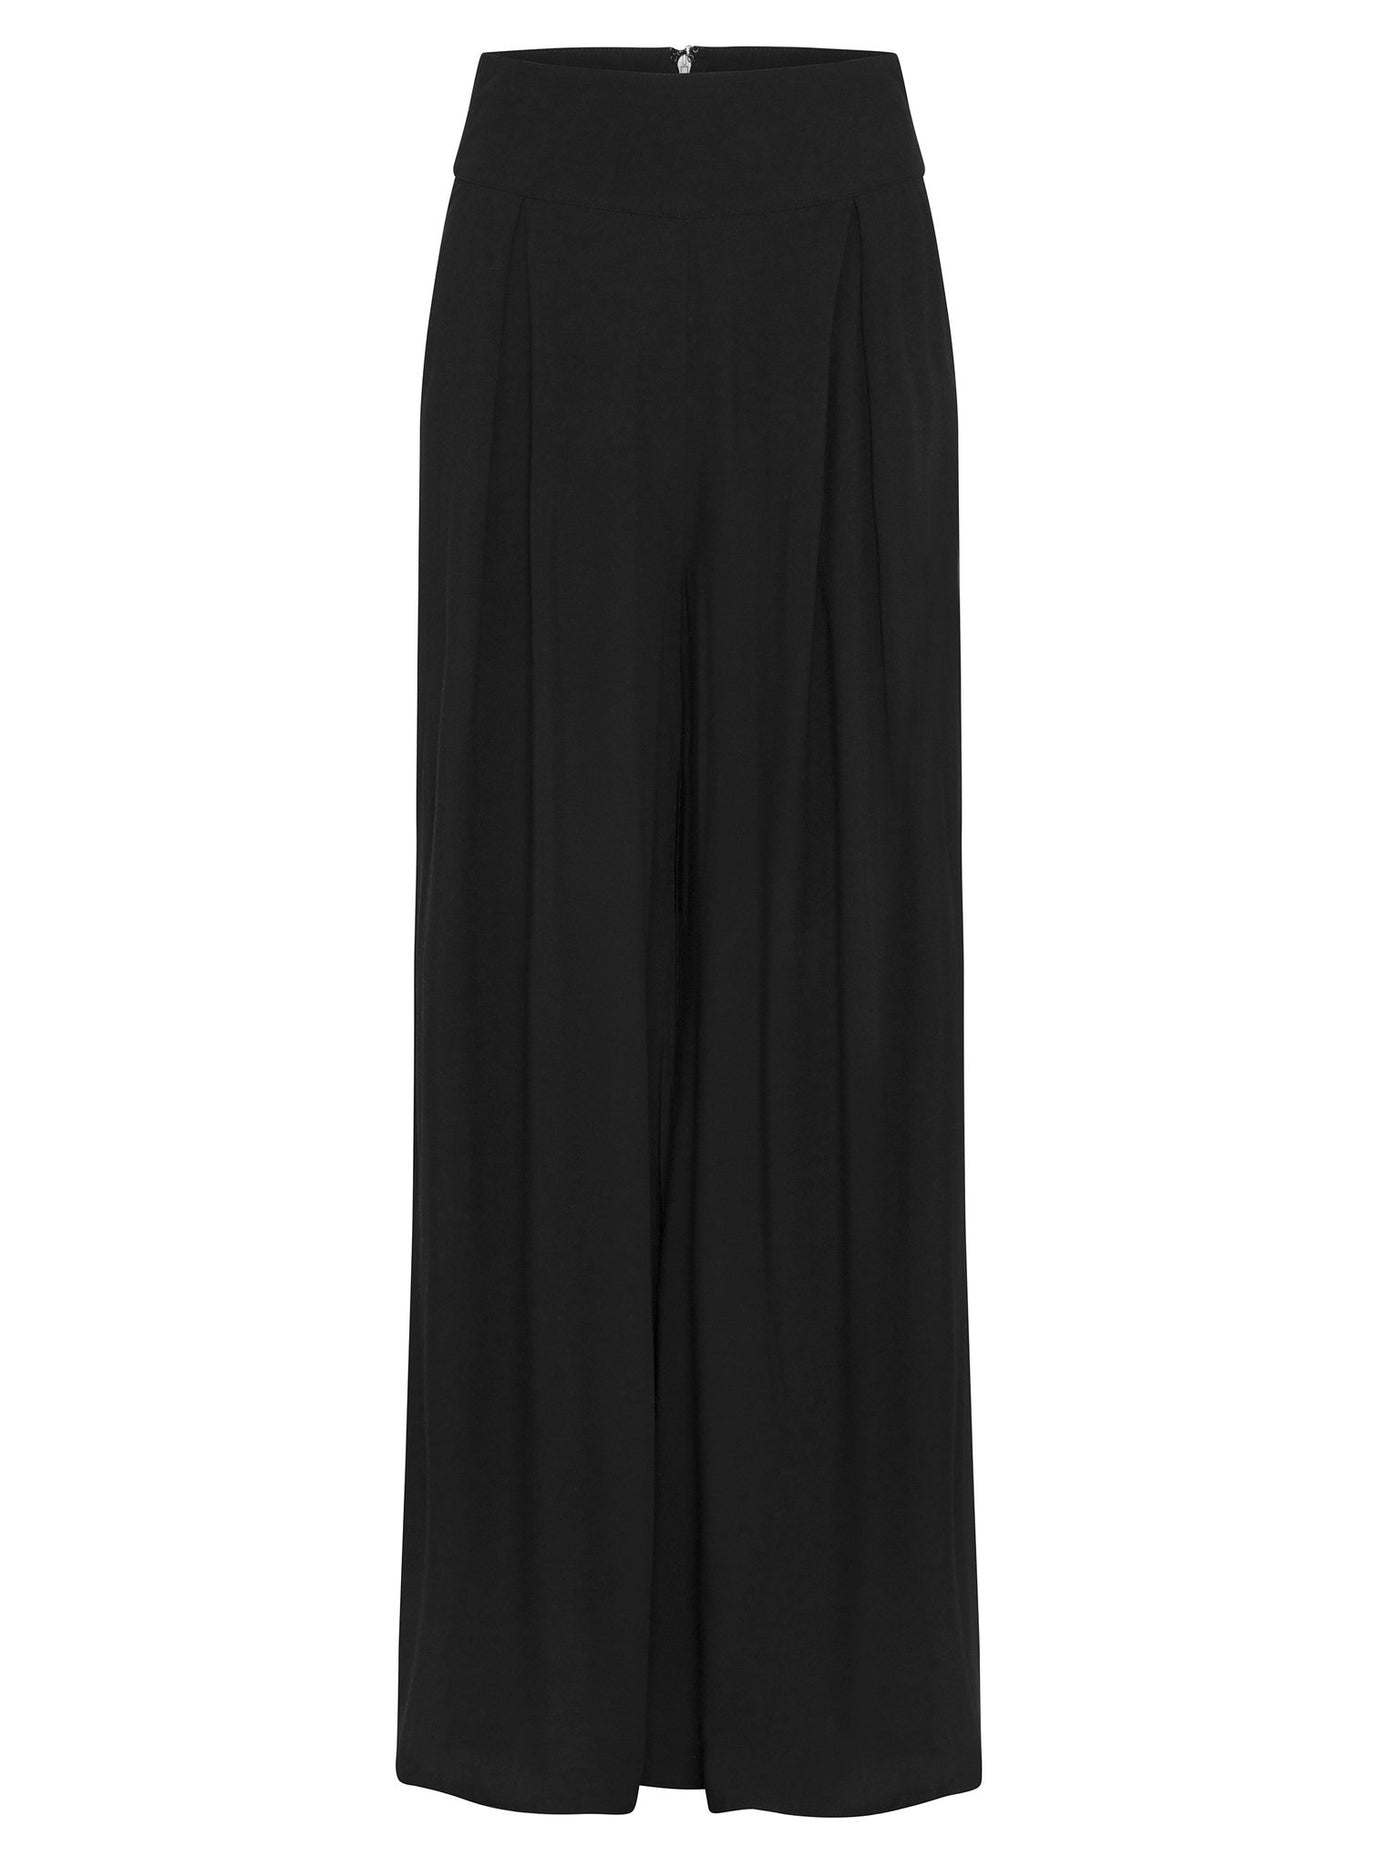 Black Palazzo Leg pants, Side Pockets, Wide Waist Panel, Inverted Pleats Under Waist Panel, Invisible Centre Back Zipper,  Hook And Eye At Top Of Zipper, 100% rayon, designed in Australia